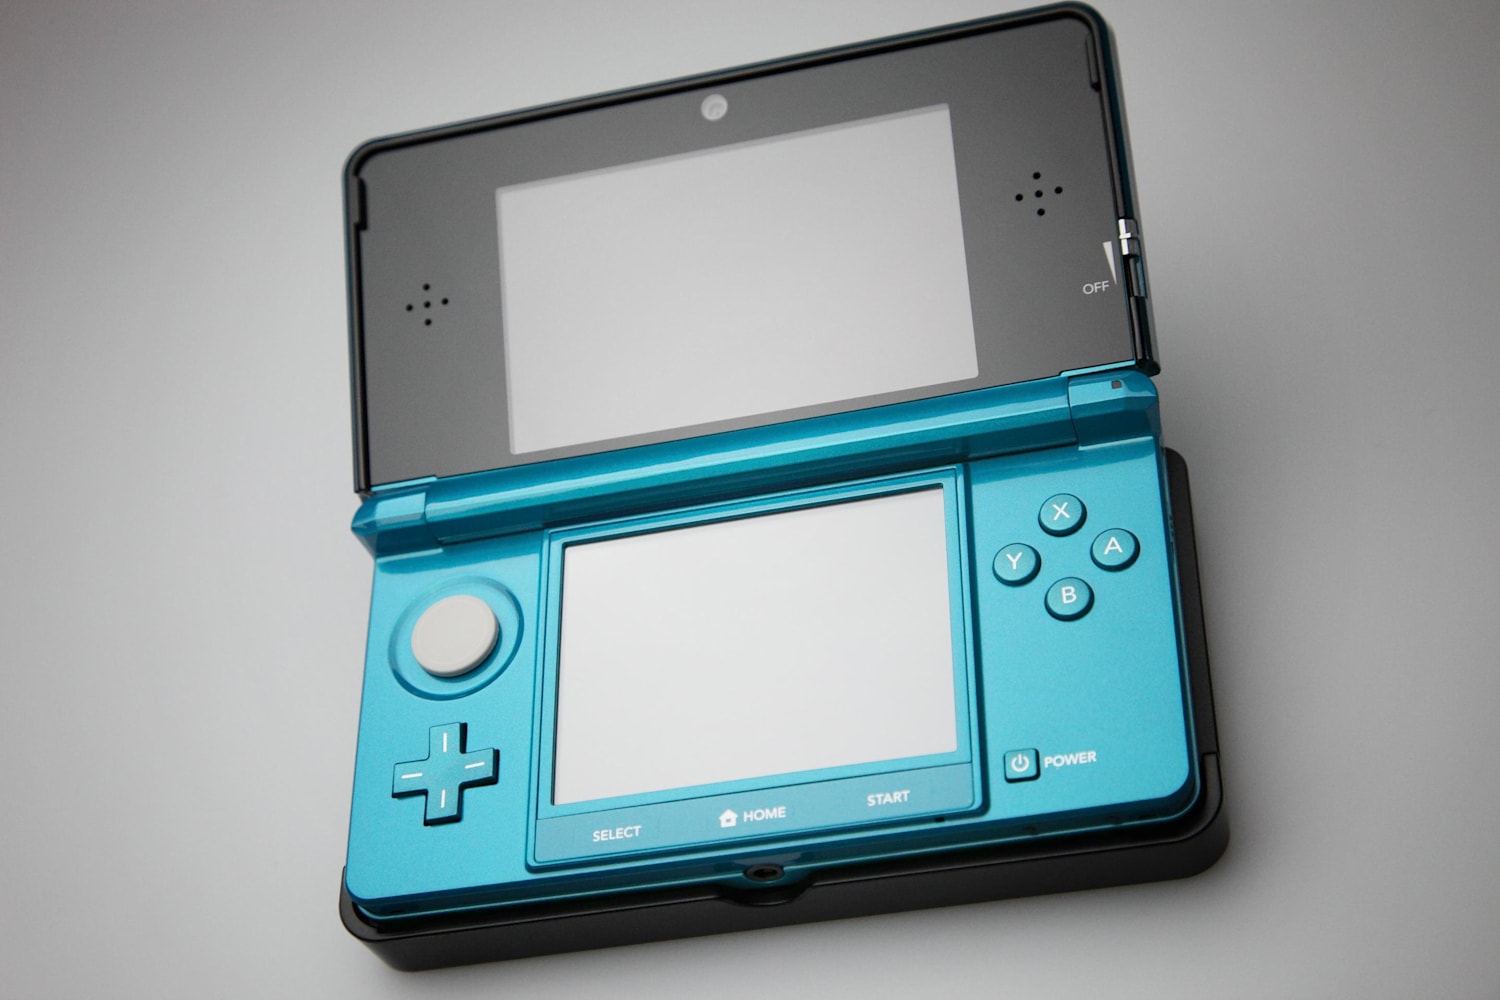 Fixed That For You 10 Ways To Boost The Nintendo 3ds